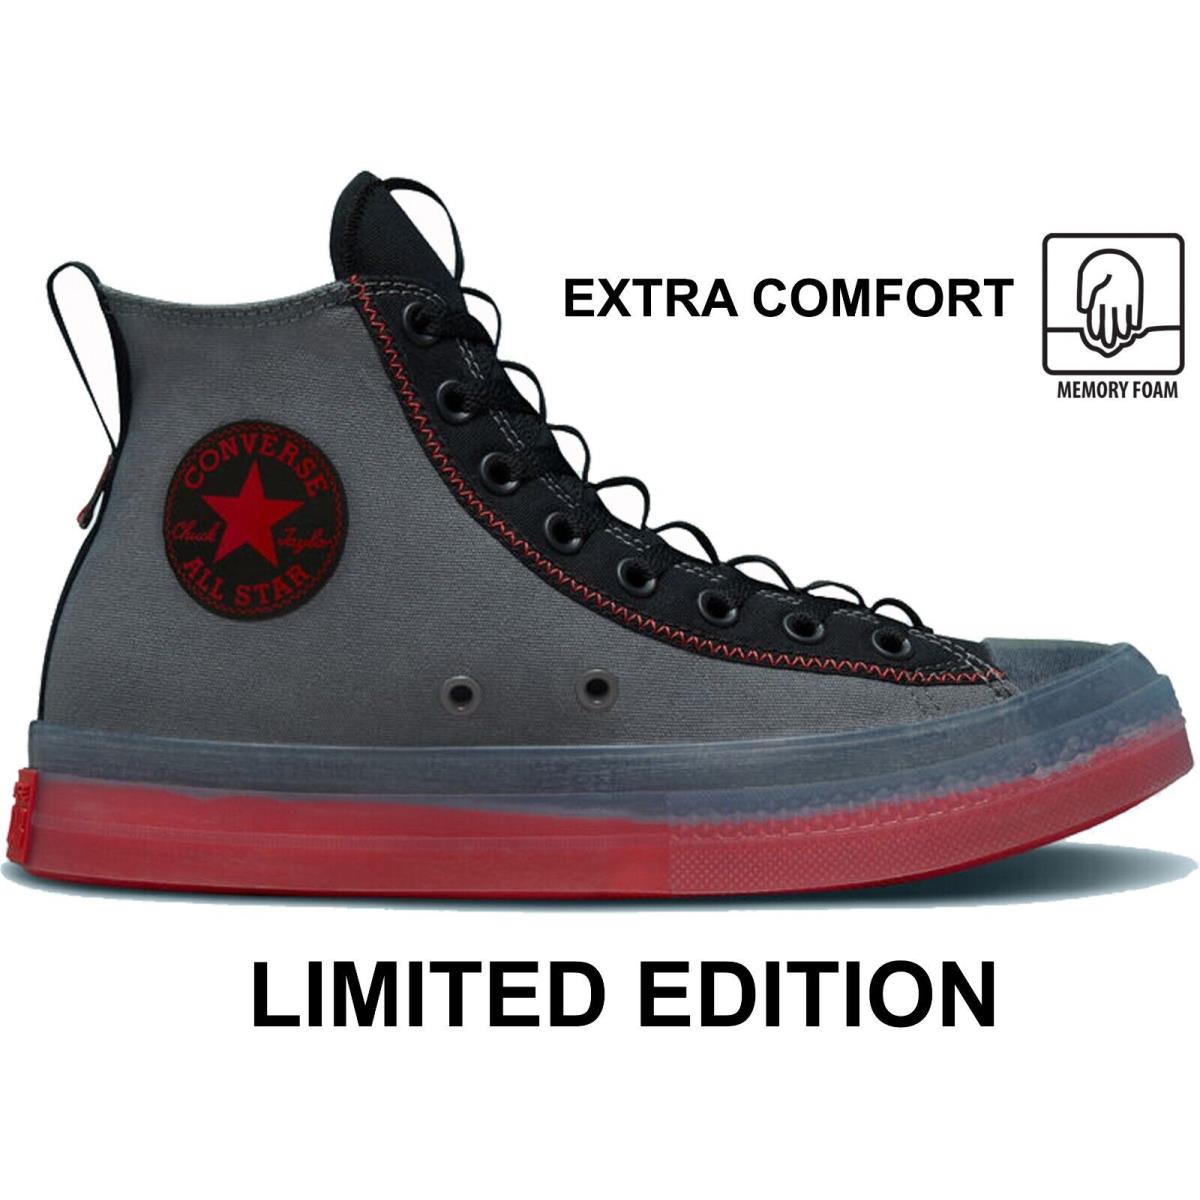 Converse Chuck Taylor All Star CX Desert Sunset High Top Men`s Athletic Shoes Iron Grey/Black/Red